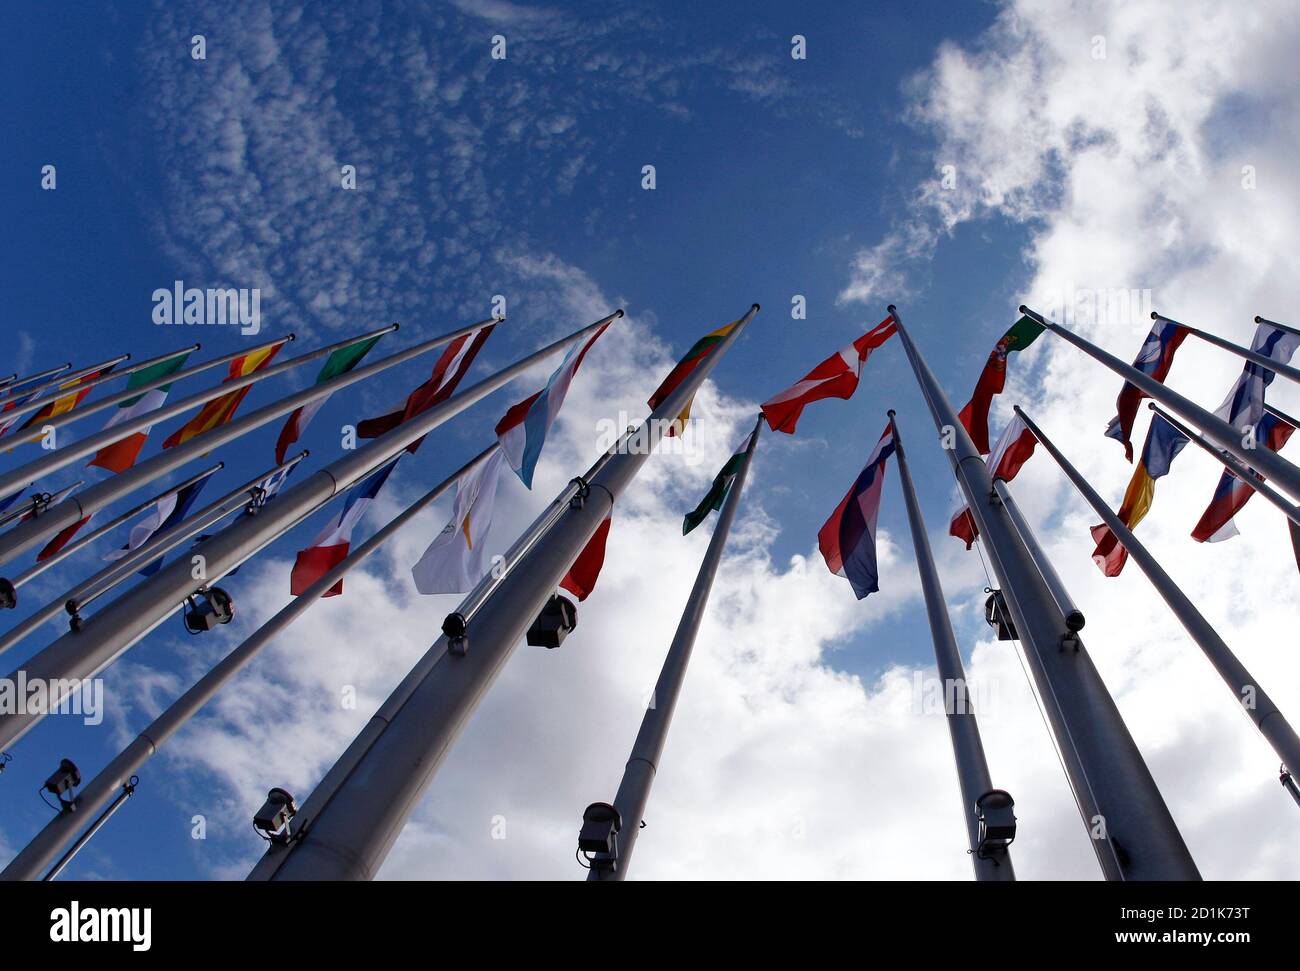 Flags of European Union member states fly in front of the European Parliament building in Strasbourg July 13, 2009, on the eve of the election of its new president. REUTERS/Vincent Kessler  (FRANCE POLITICS) Stock Photo